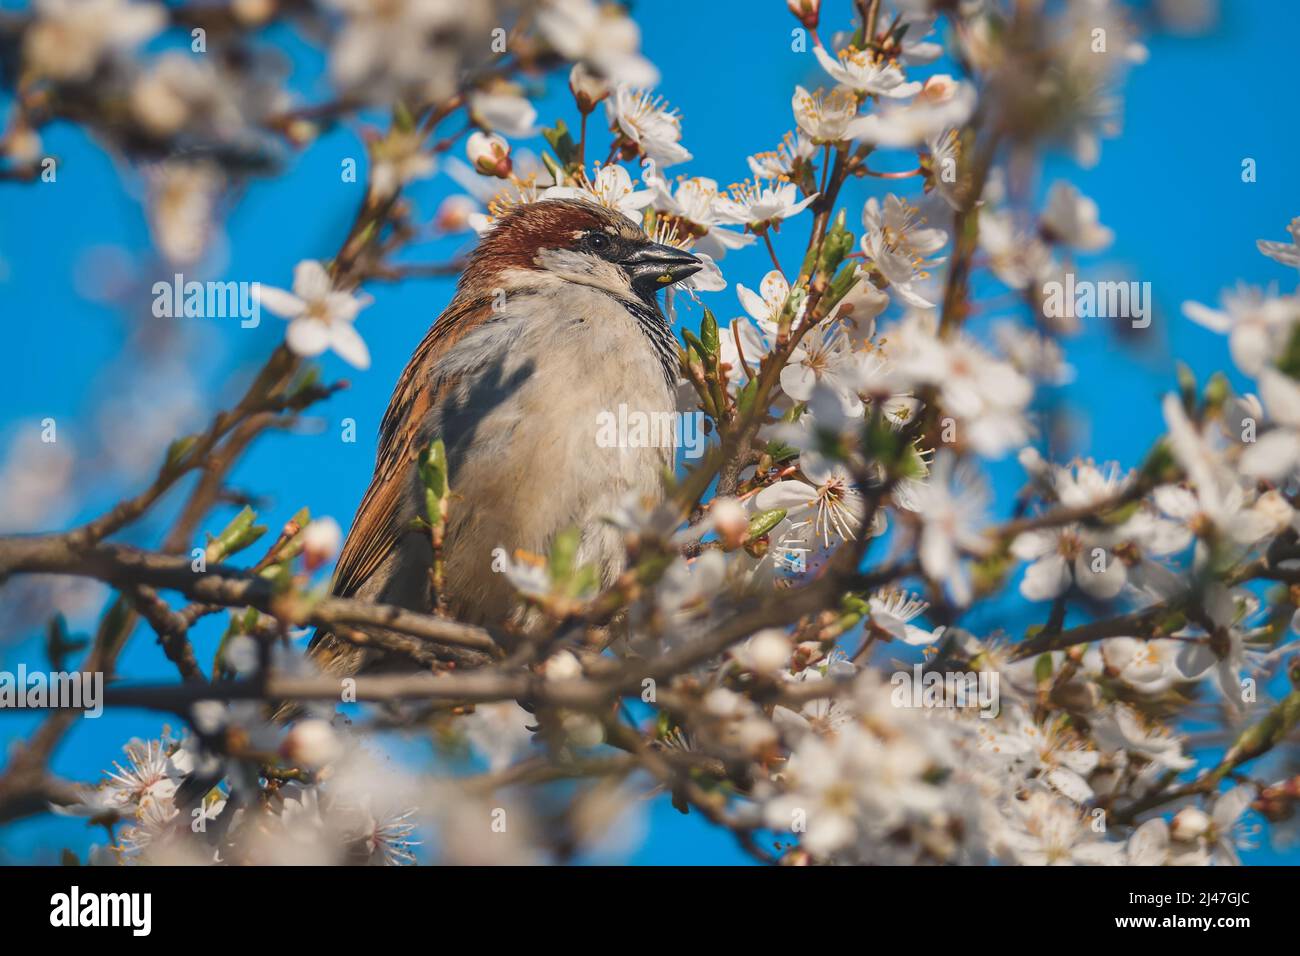 Spring fauna and flora. Common sparrow on tree branches. Stock Photo